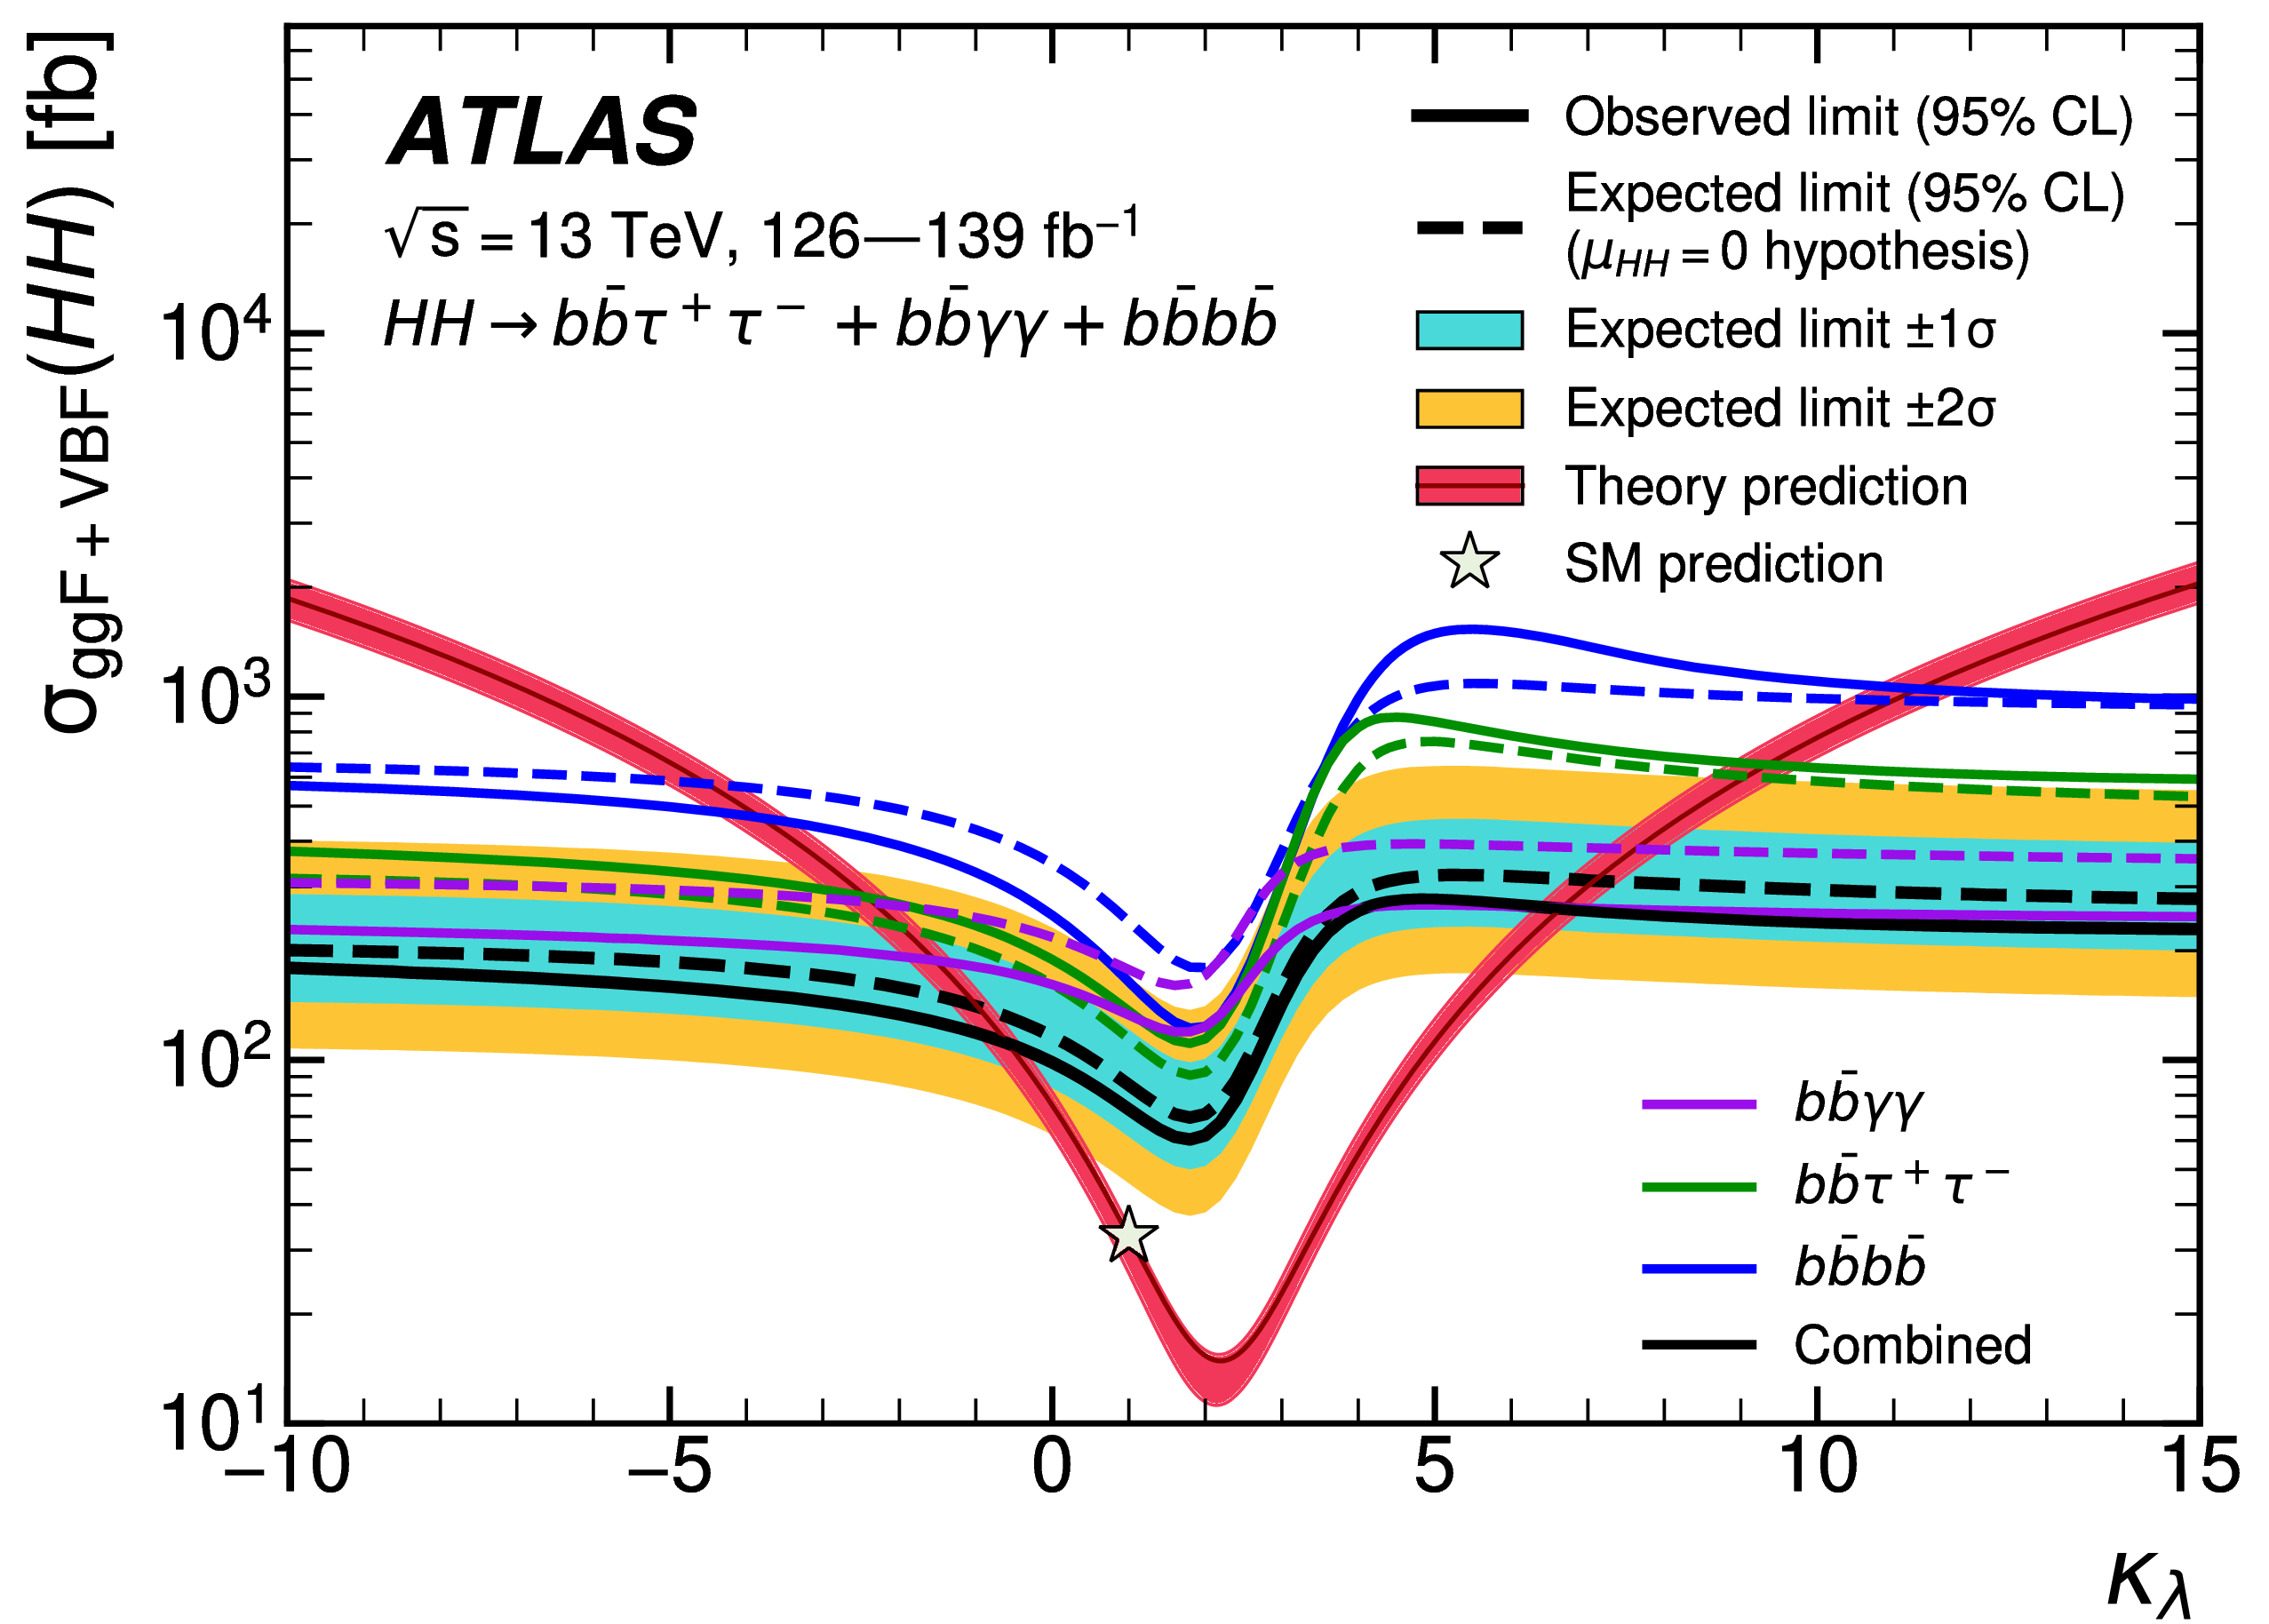 Figure 4: Combined ATLAS exclusion limits of ggF di-Higgs production cross-section with respect to Higgs self-coupling strength $\kappa_\lambda$.